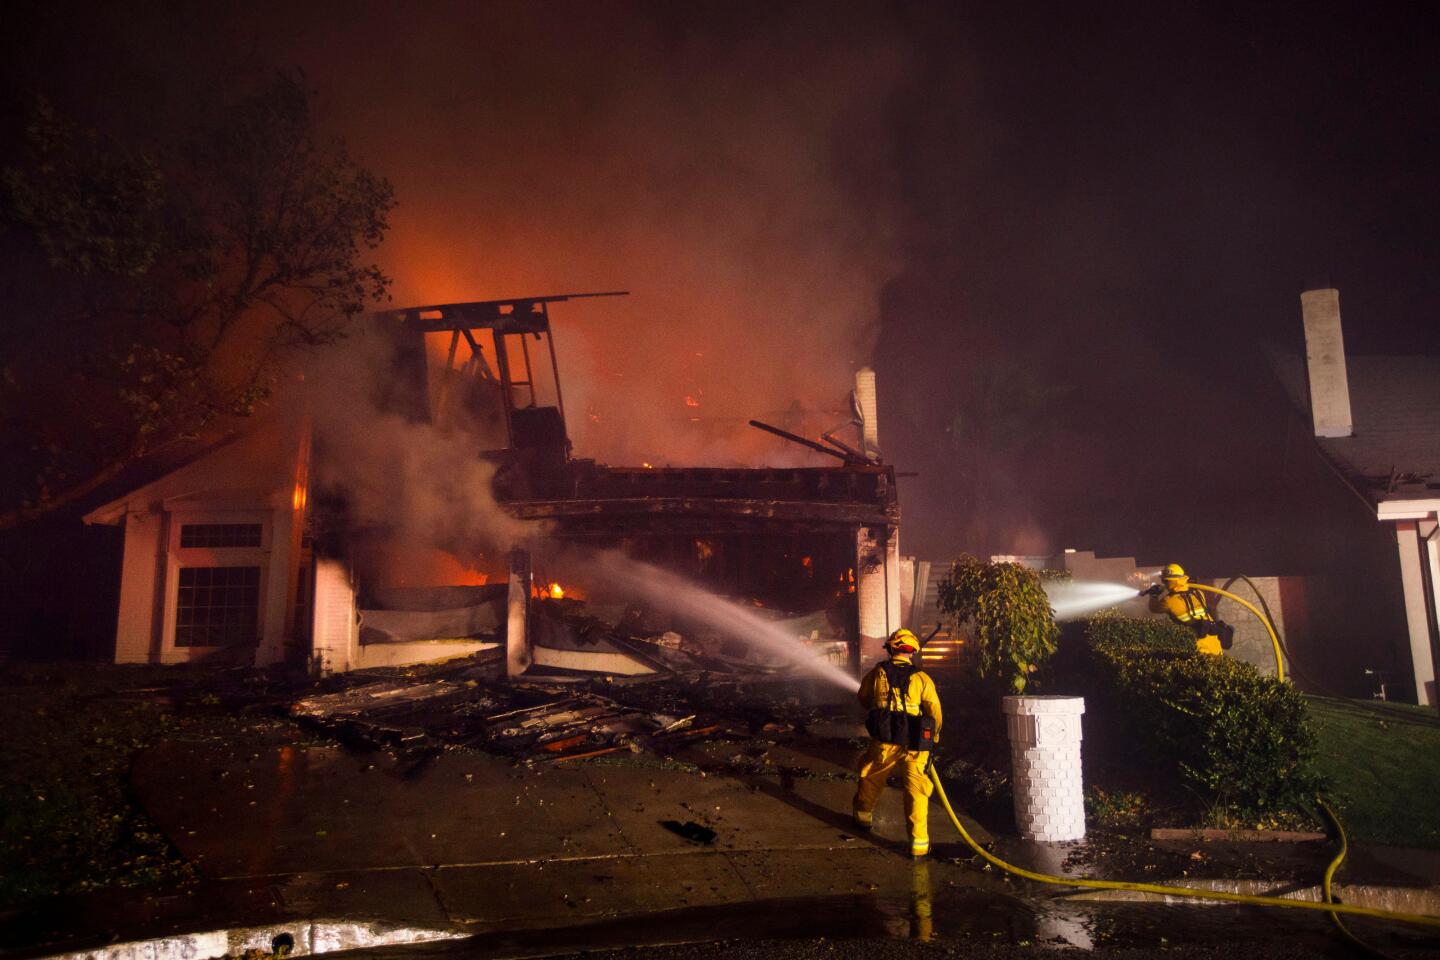 Firefighters work to contain the Saddleridge fire from spreading as a home burns in Porter Ranch.